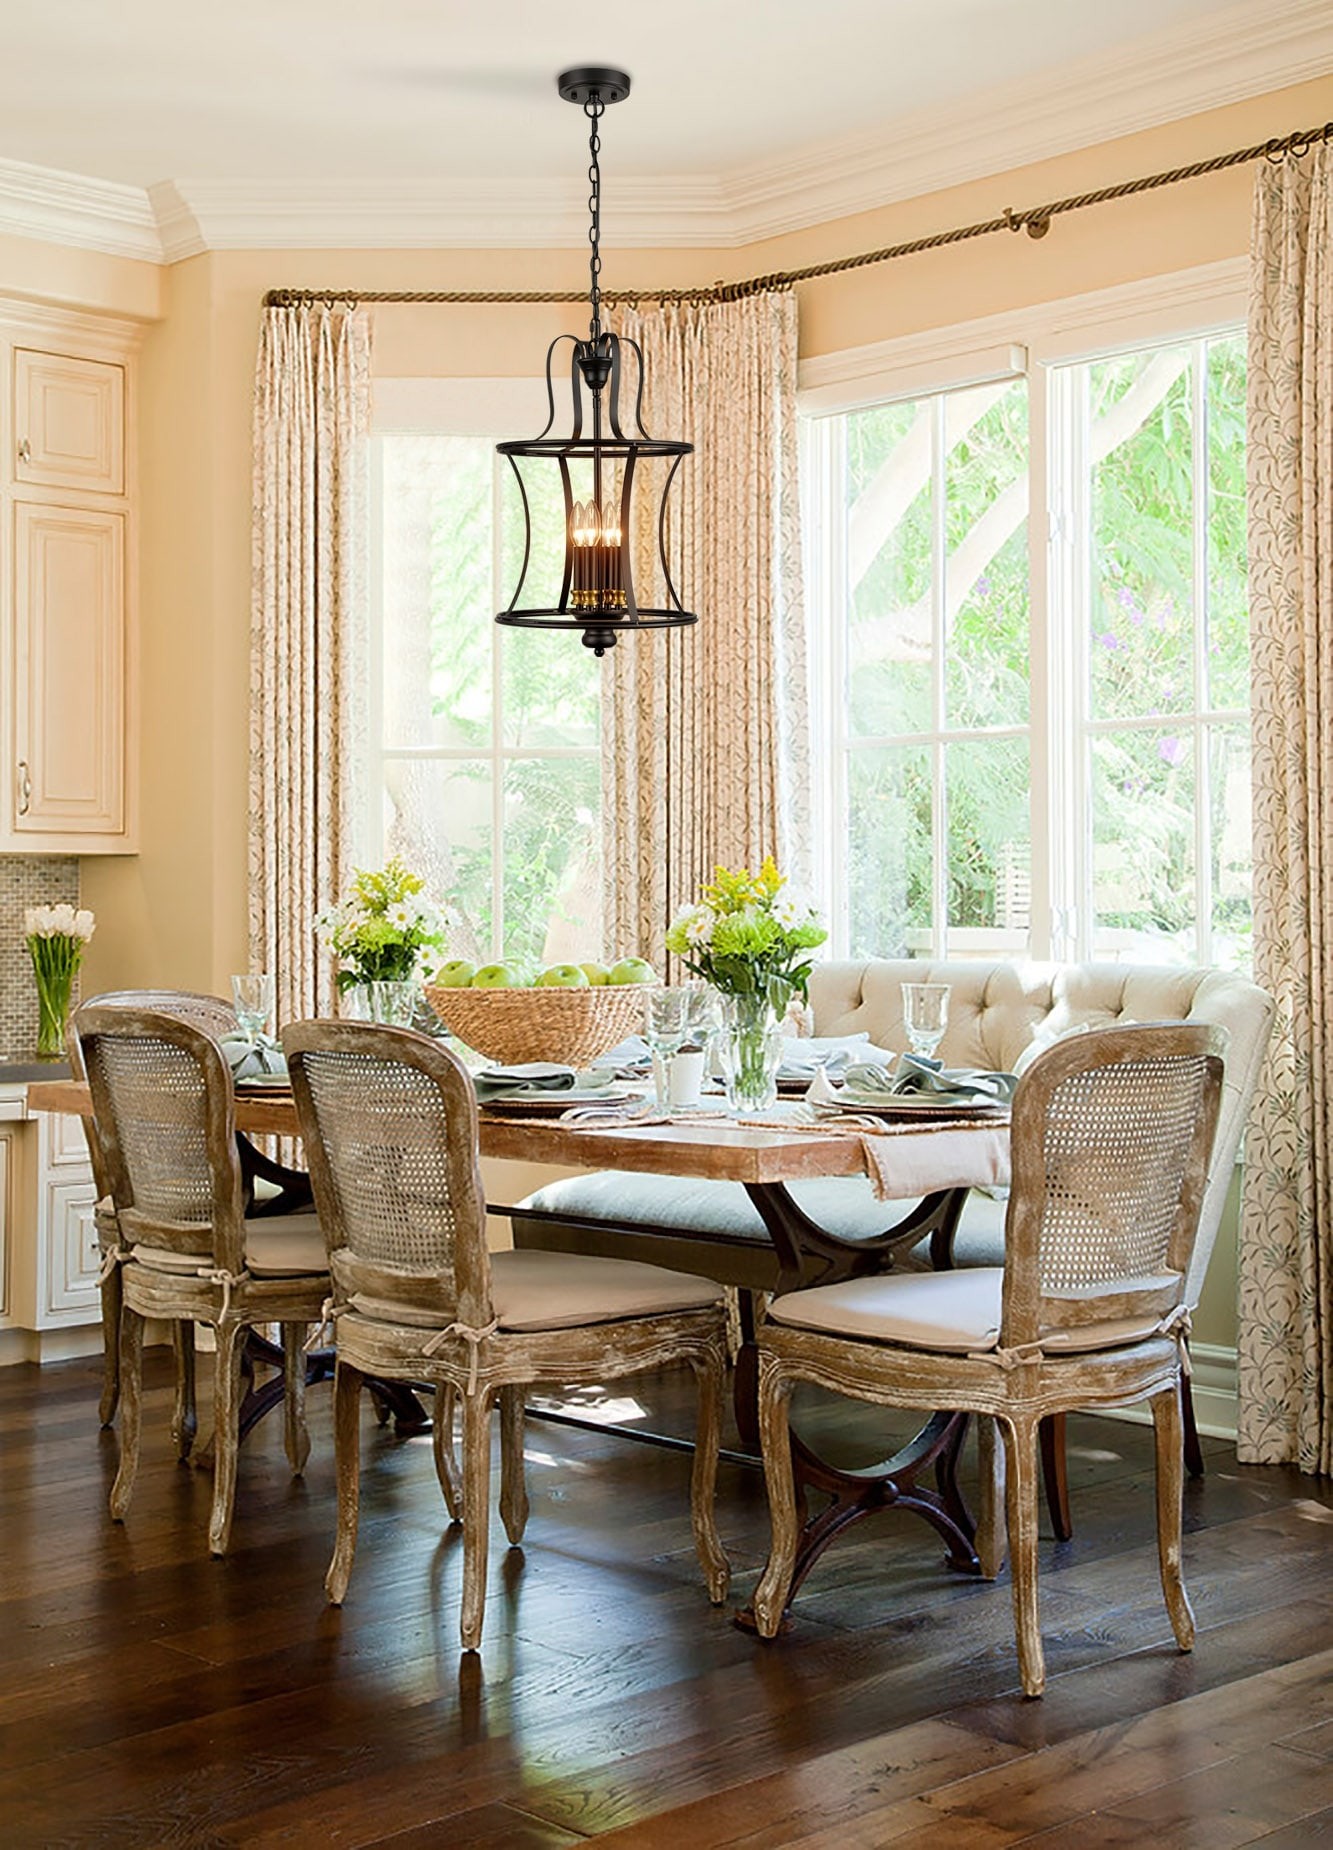 10th street traditional dining room los angeles george interior design